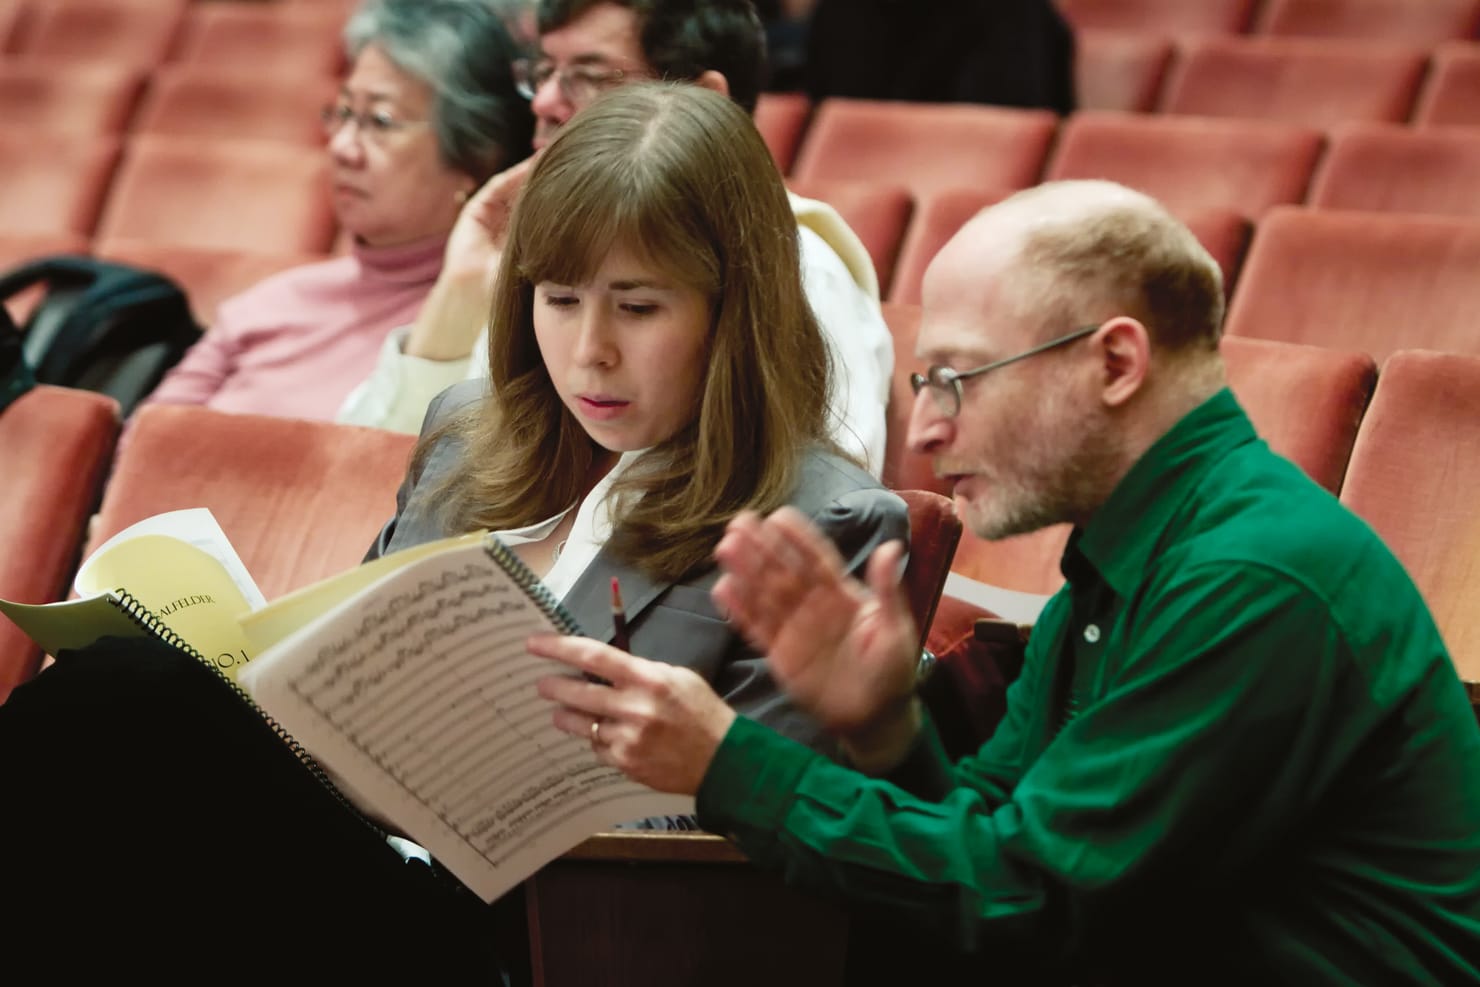 2009 Composer Institute participant Kathryn Salfelder with then-Composer Institute Director Aaron Jay Kernis.